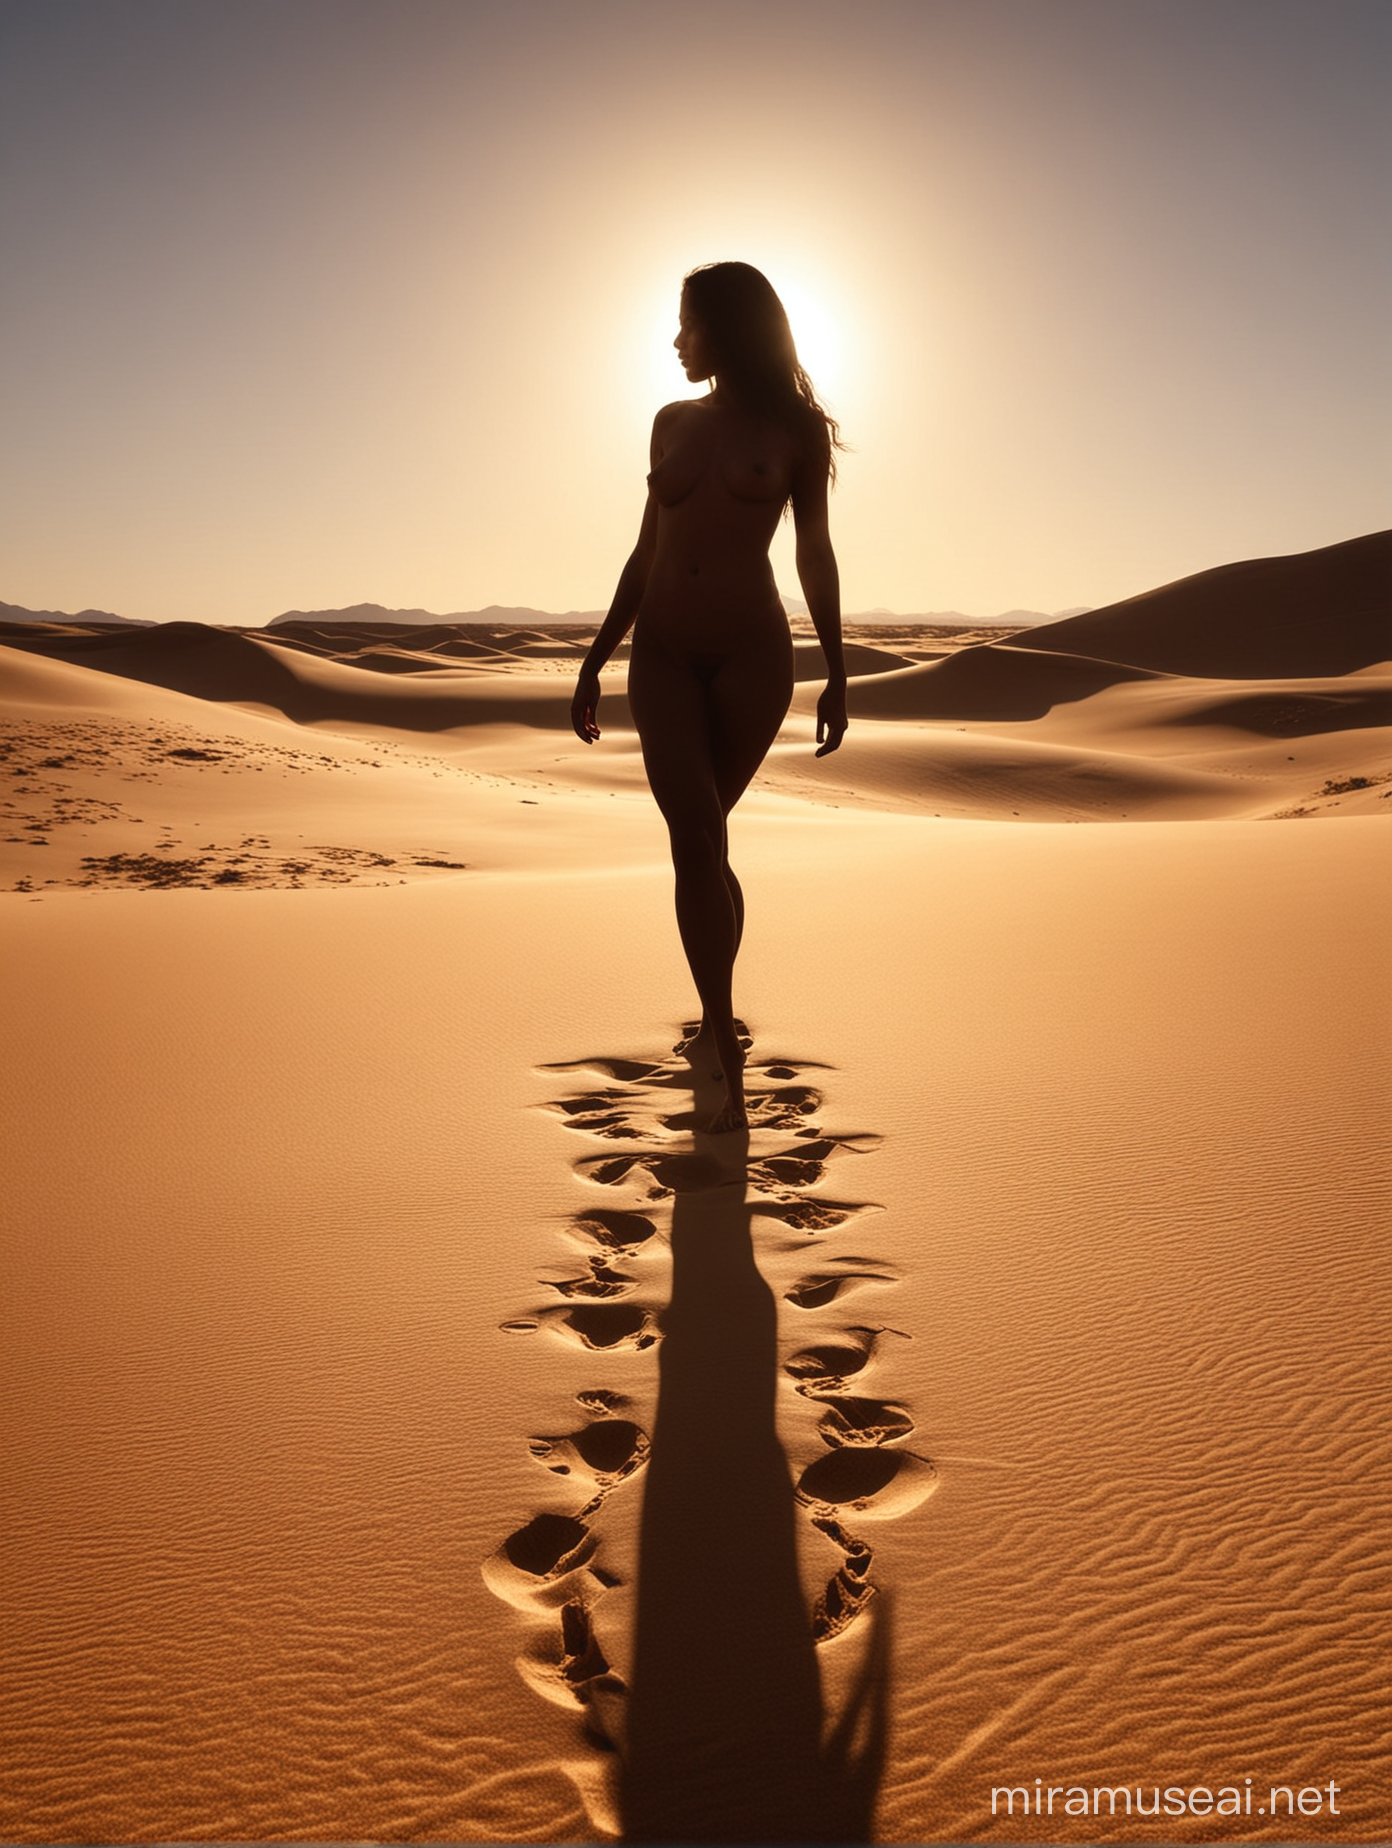 Sand falls in form of black silhouette of nude woman.
Woman stands on desert,
Picture is with backround in sunset golden atmosphere.